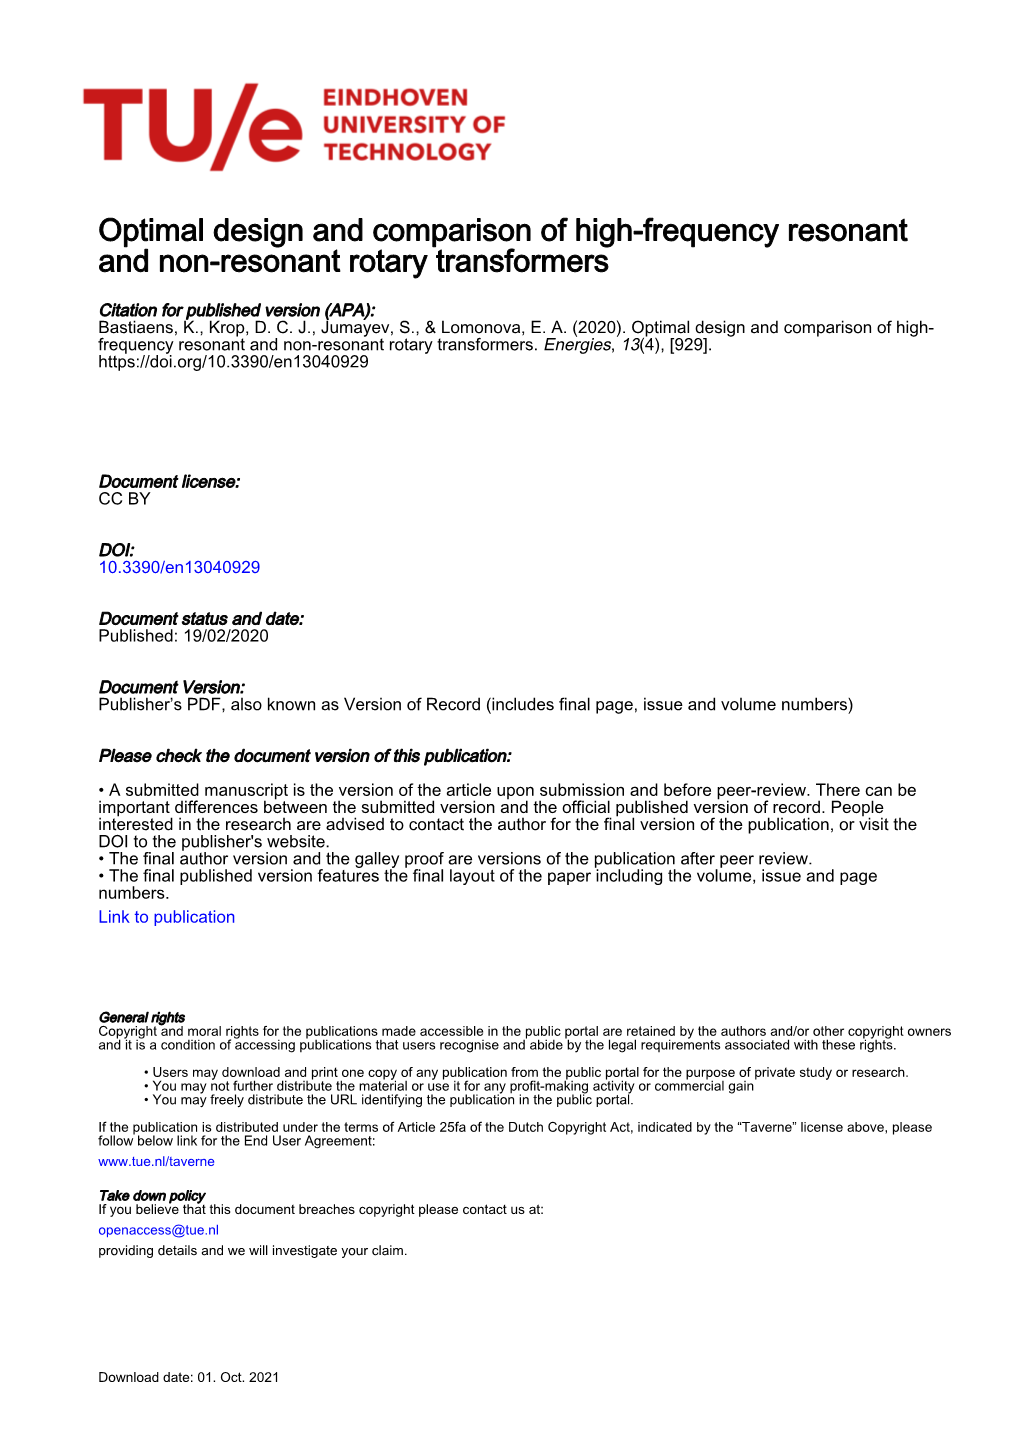 Optimal Design and Comparison of High-Frequency Resonant and Non-Resonant Rotary Transformers